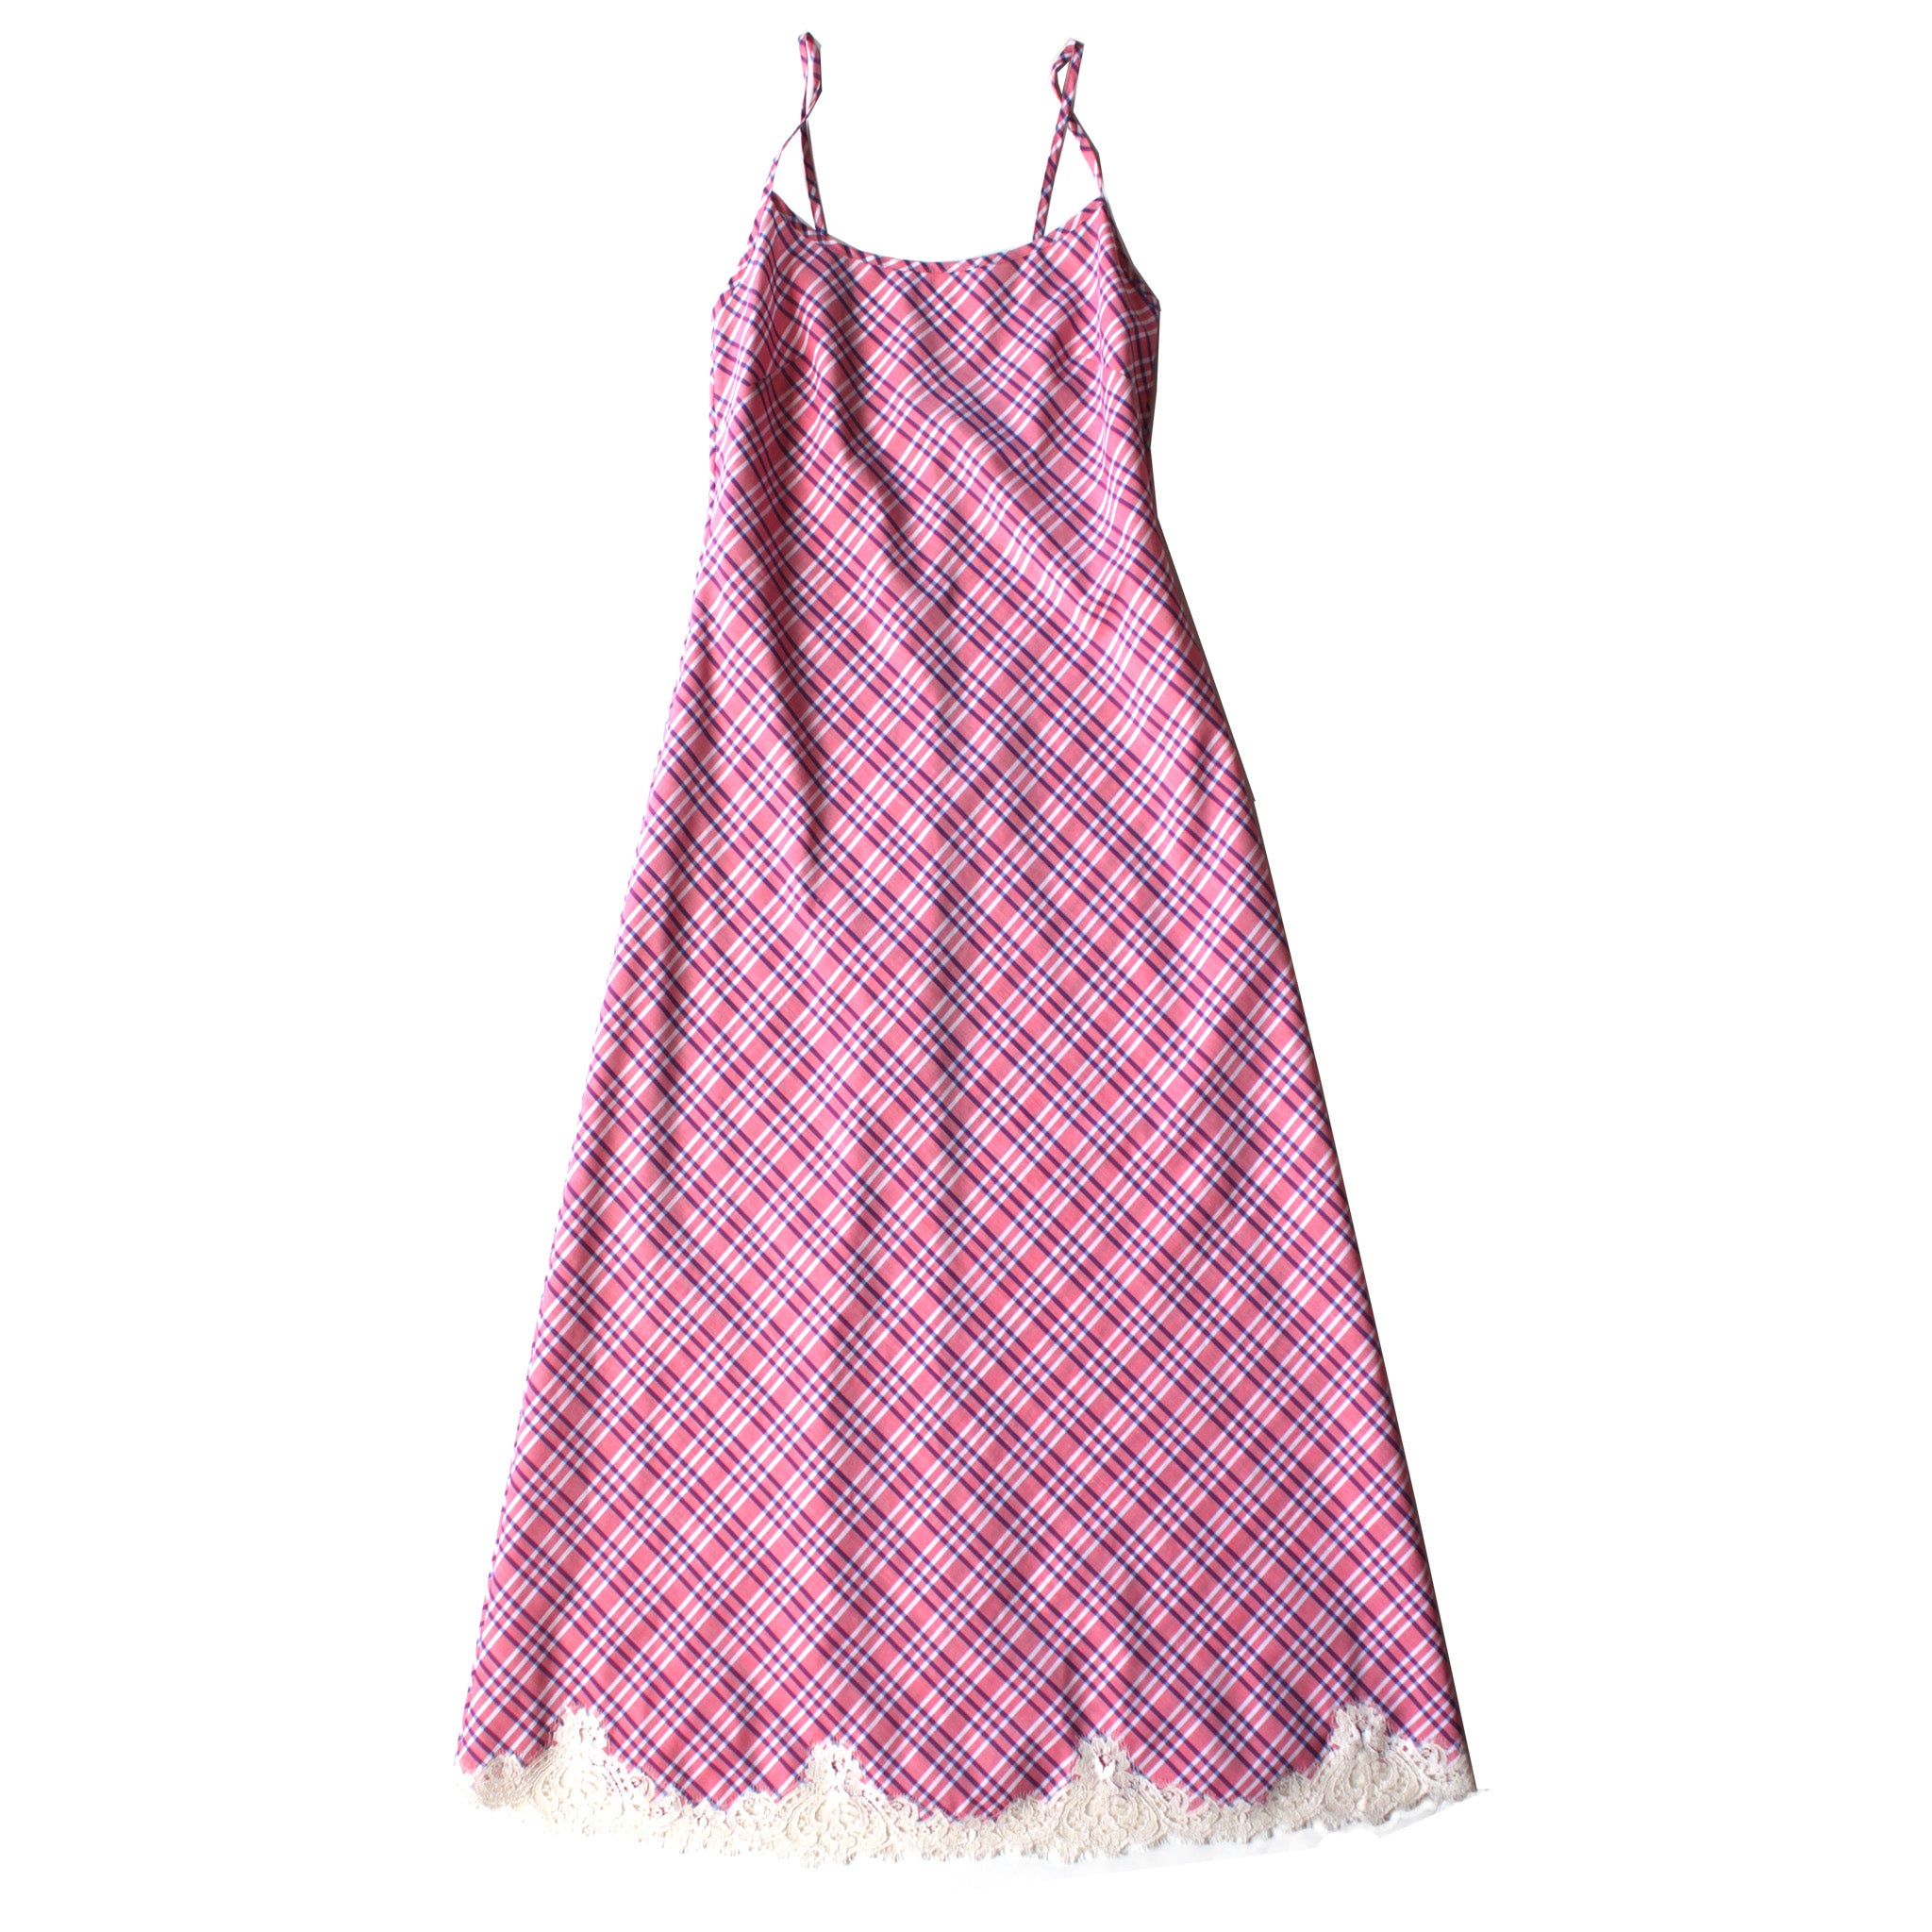 Juno Slip Dress in Italian Cotton Pink Plaid with Lace